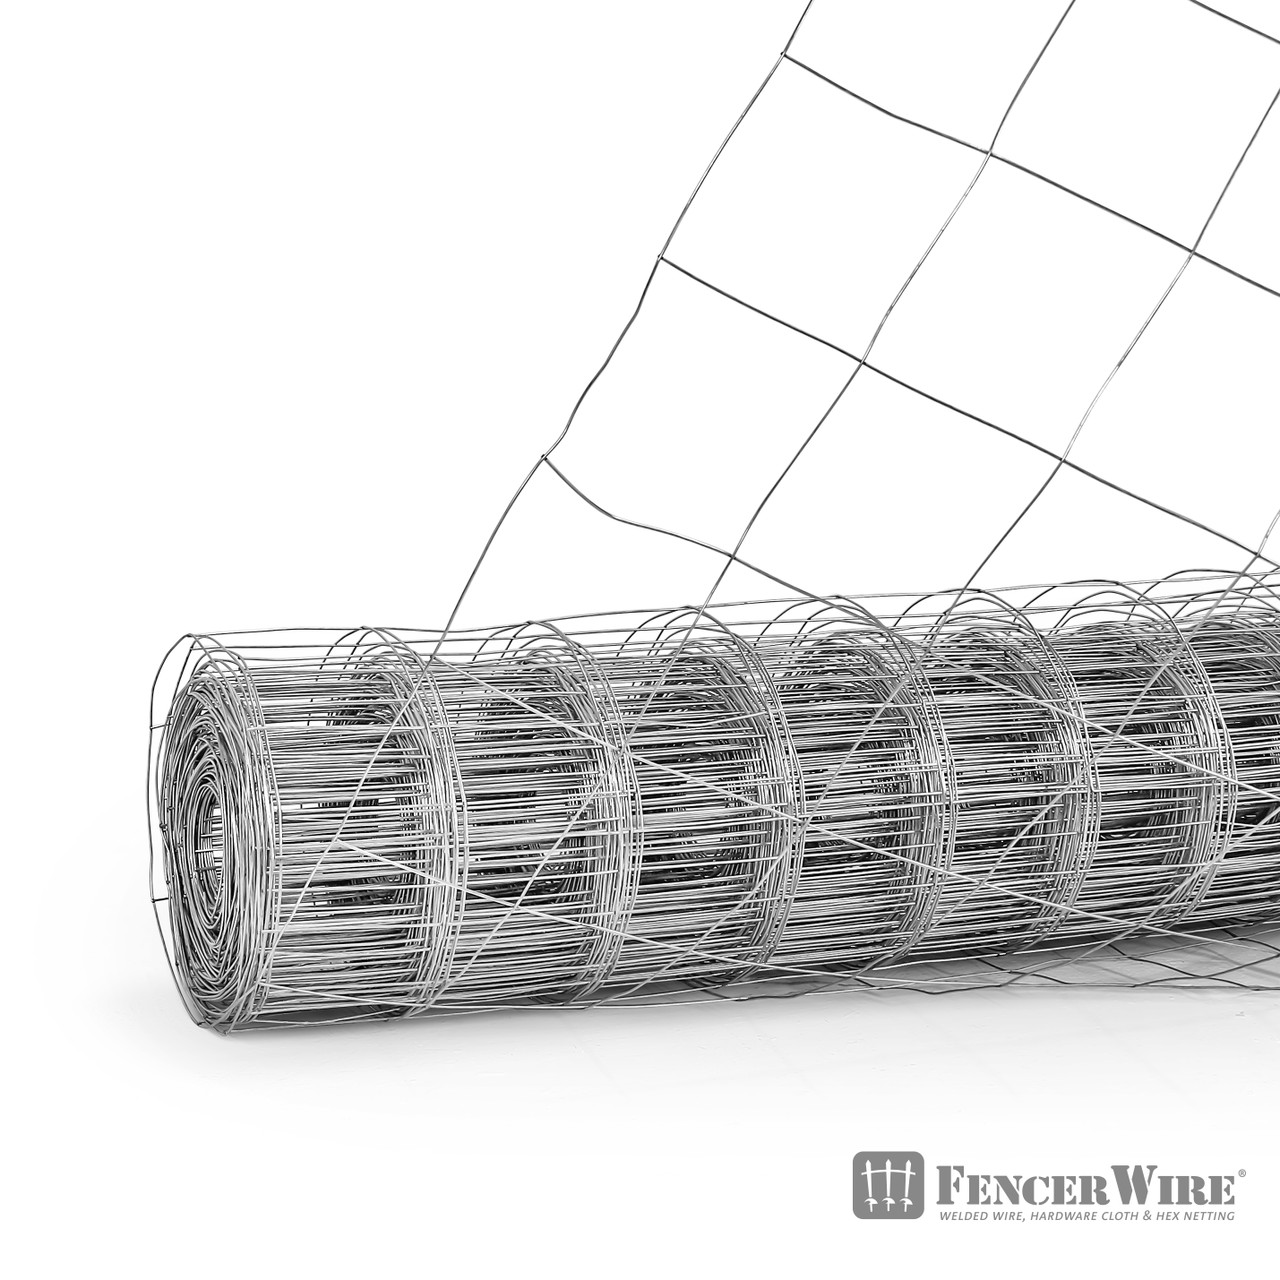 Fencer Wire 16 Gauge Galvanized Welded Wire Mesh Size 4 inch by 4 inch (5  ft. x 100 ft.) - FencerWire